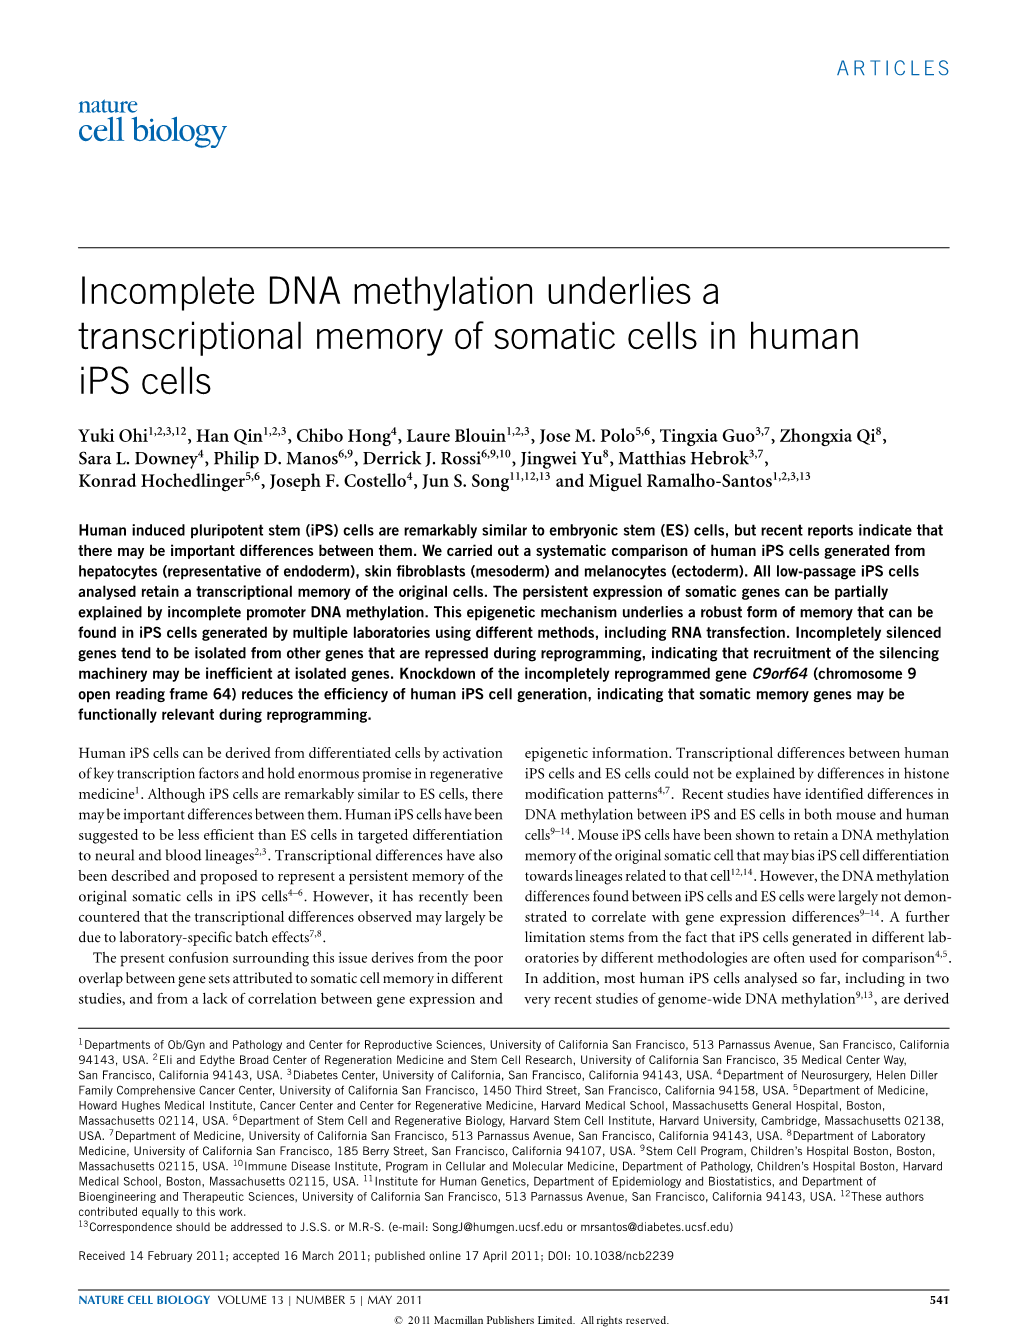 Incomplete DNA Methylation Underlies a Transcriptional Memory of Somatic Cells in Human Ips Cells